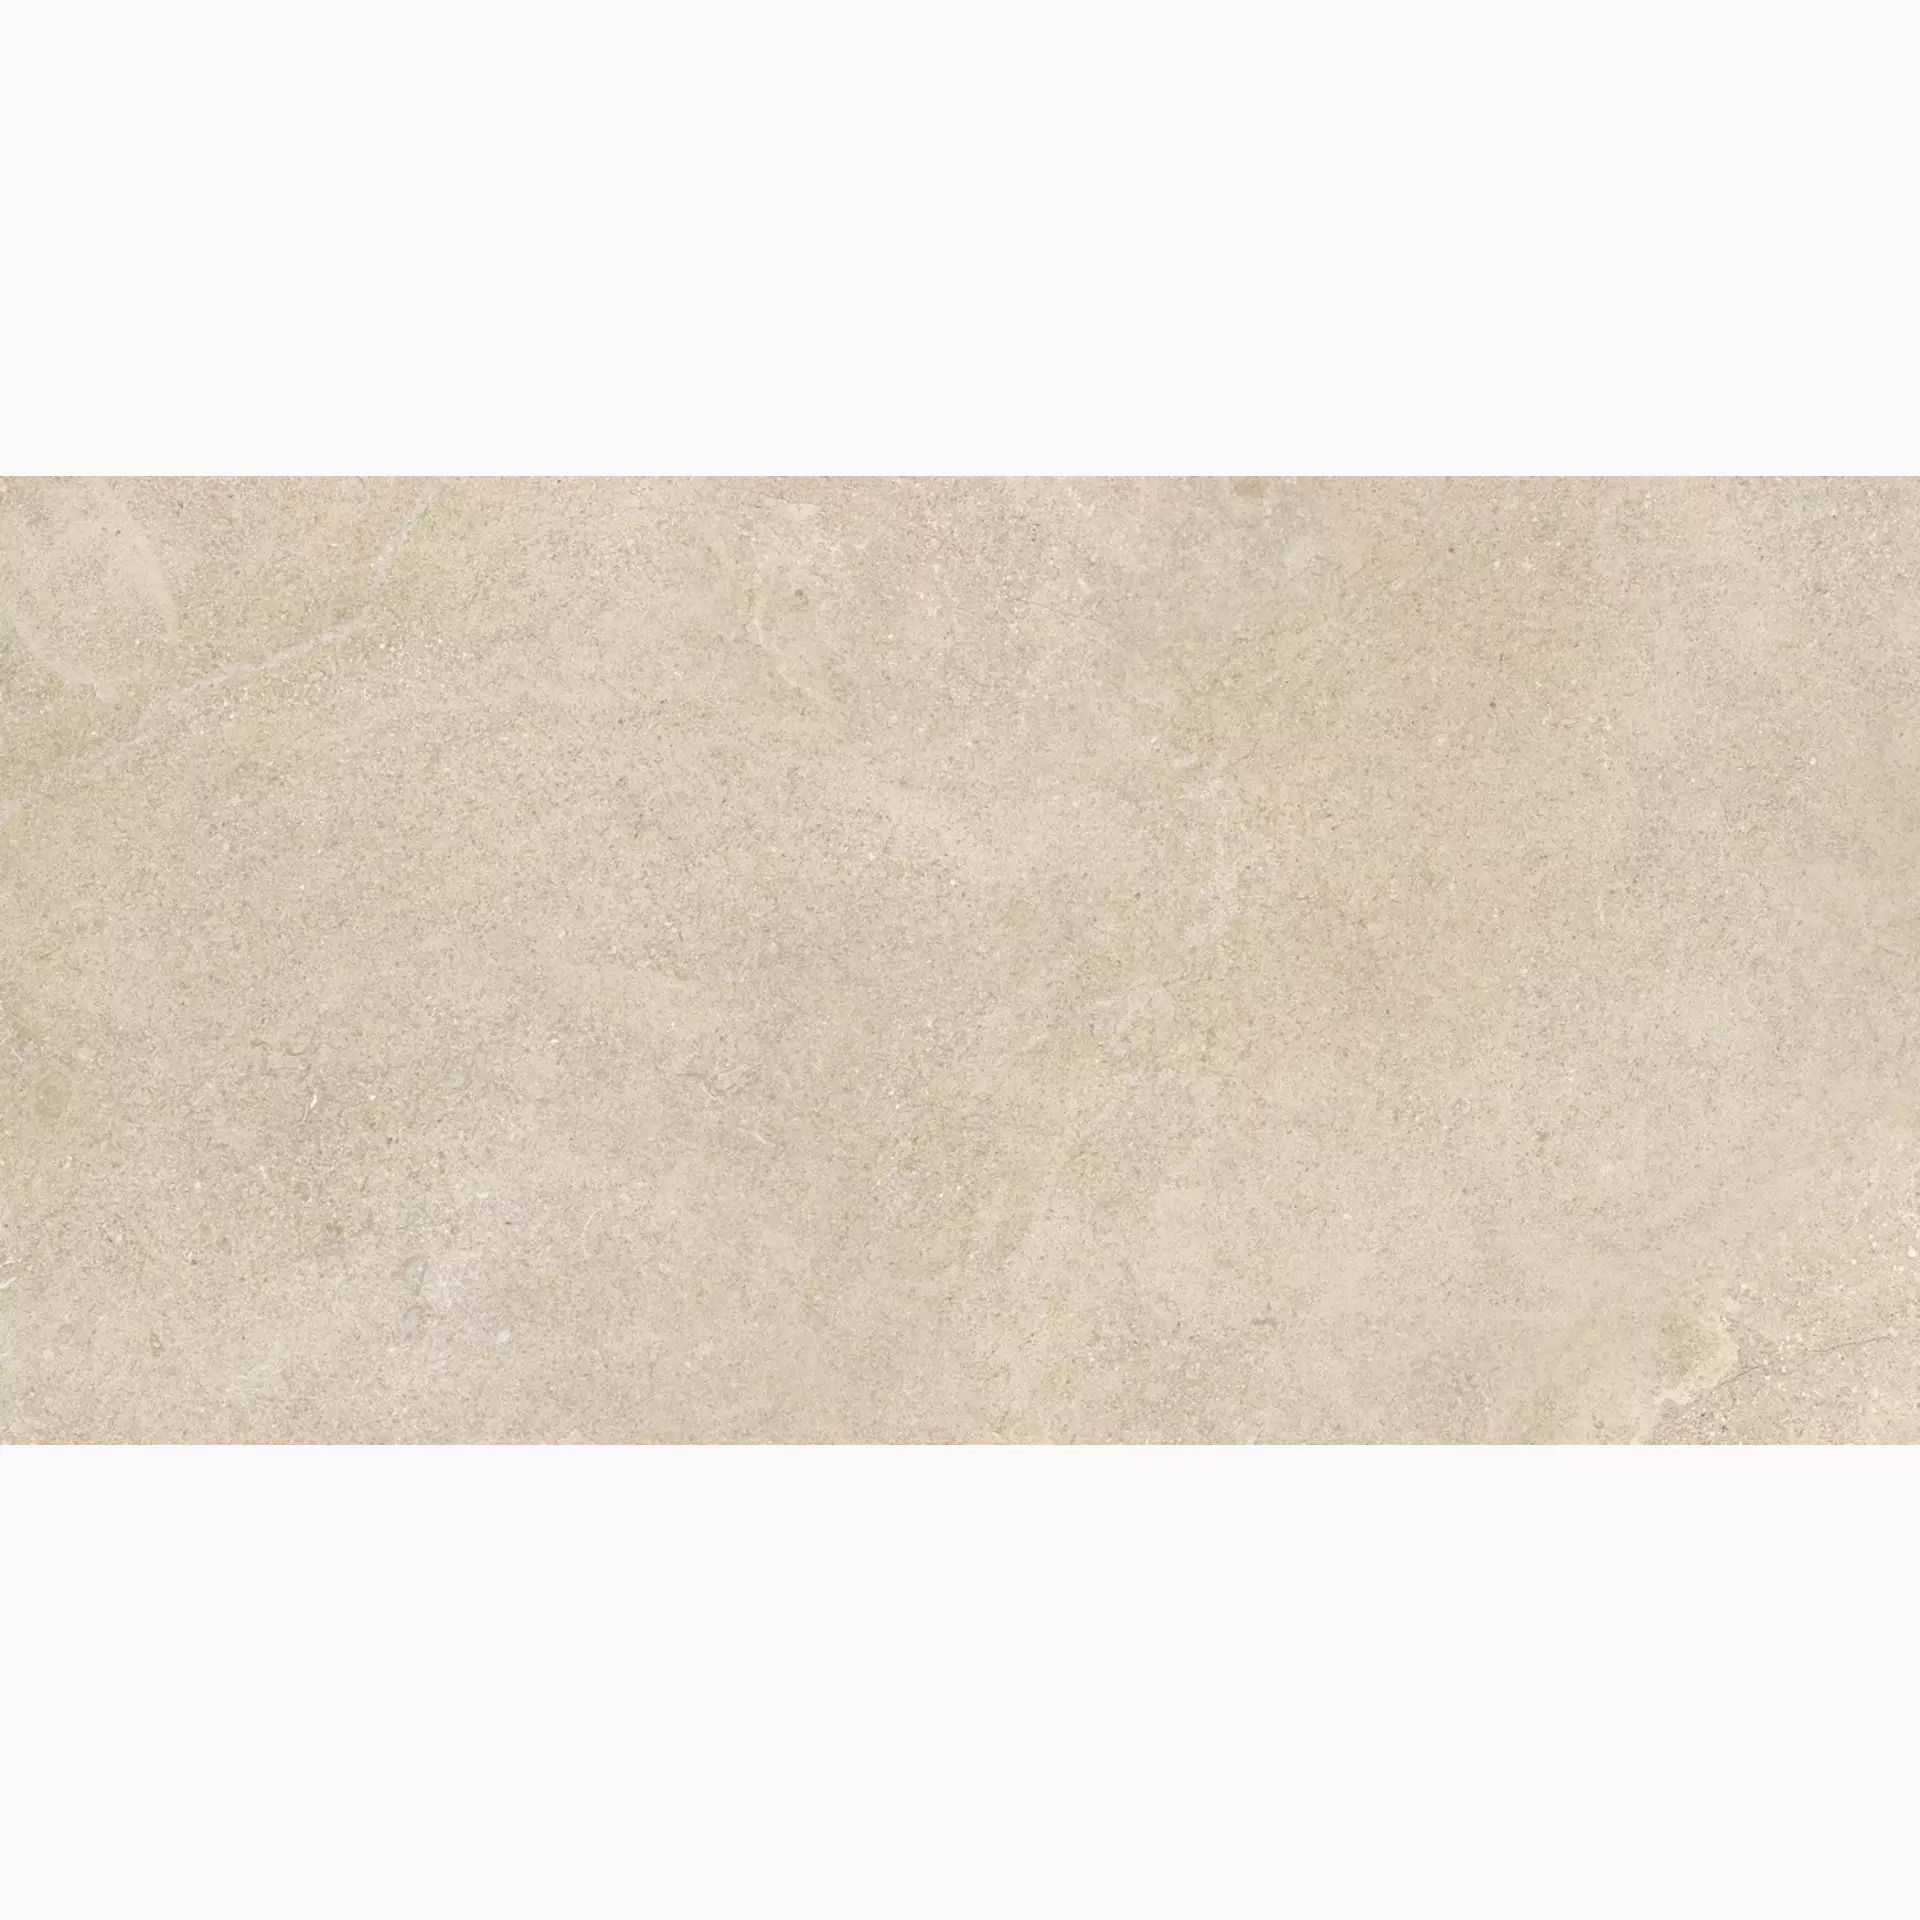 Ragno Kalkstone Sand RAHL rectified 9,5mm